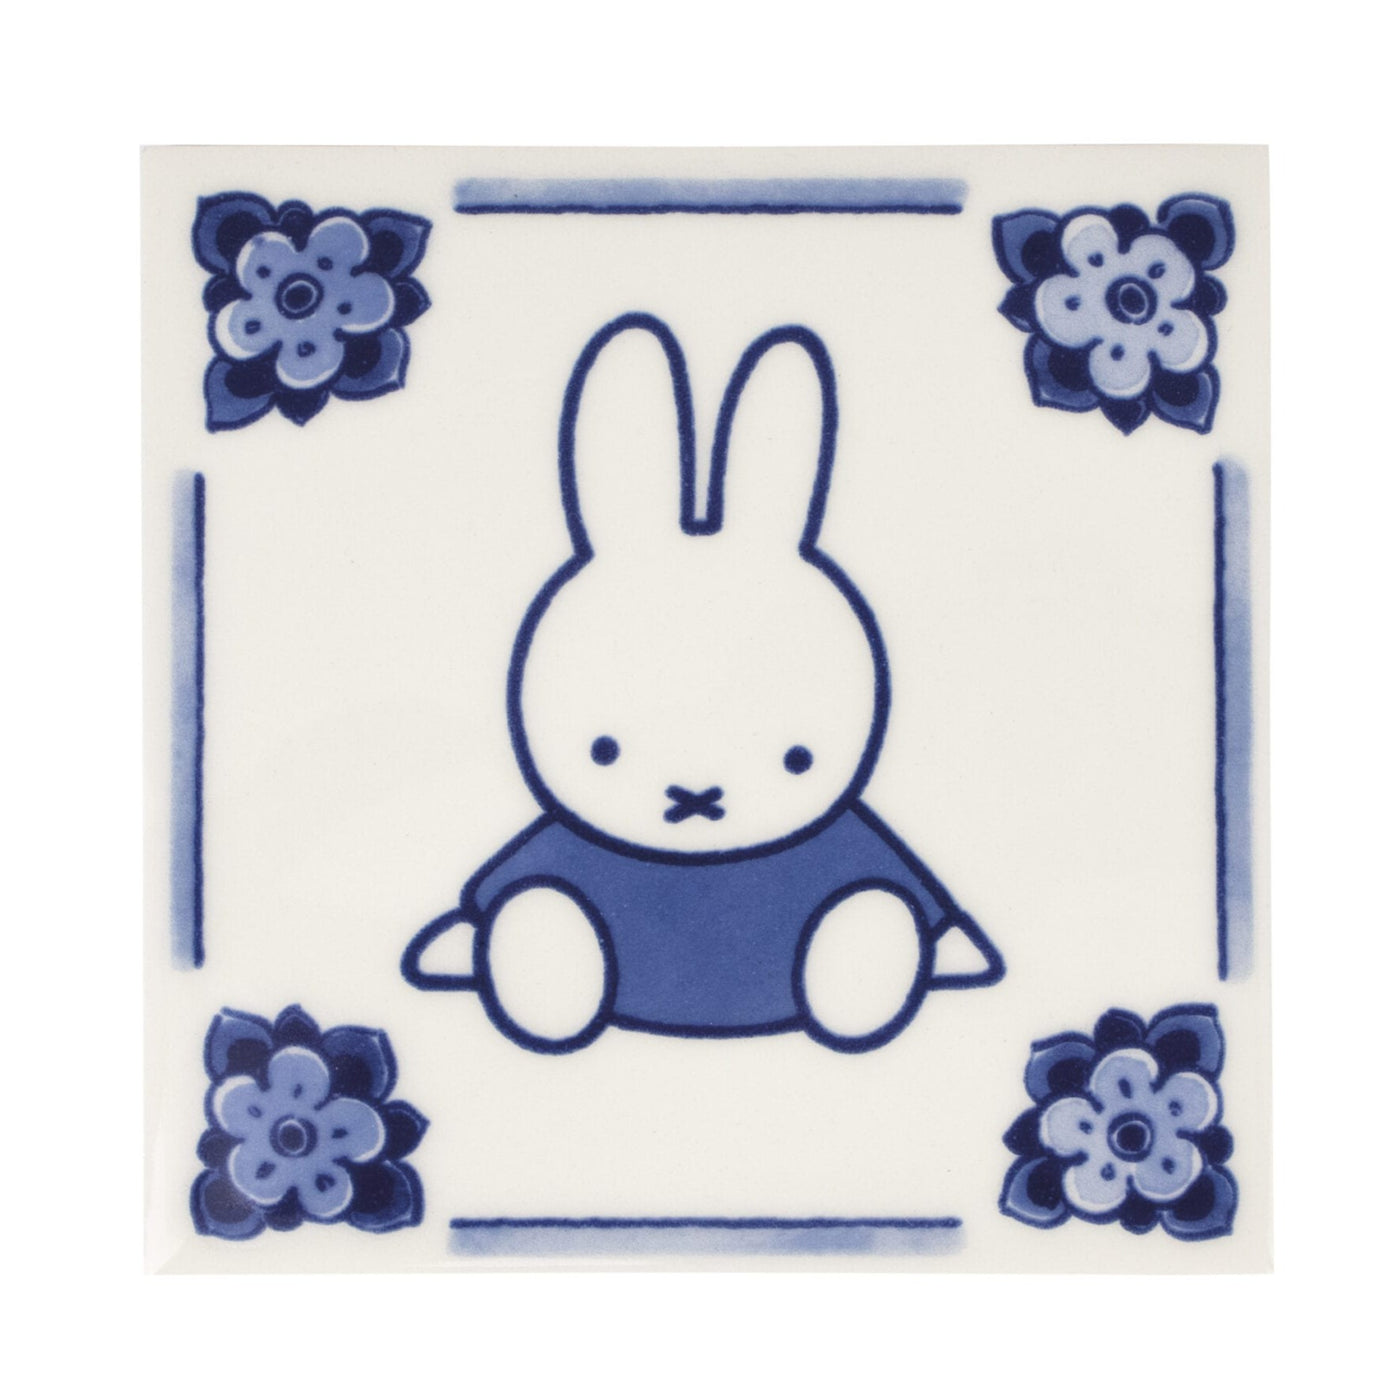 Tile Miffy Sitting Delft Blue by Royal Delft